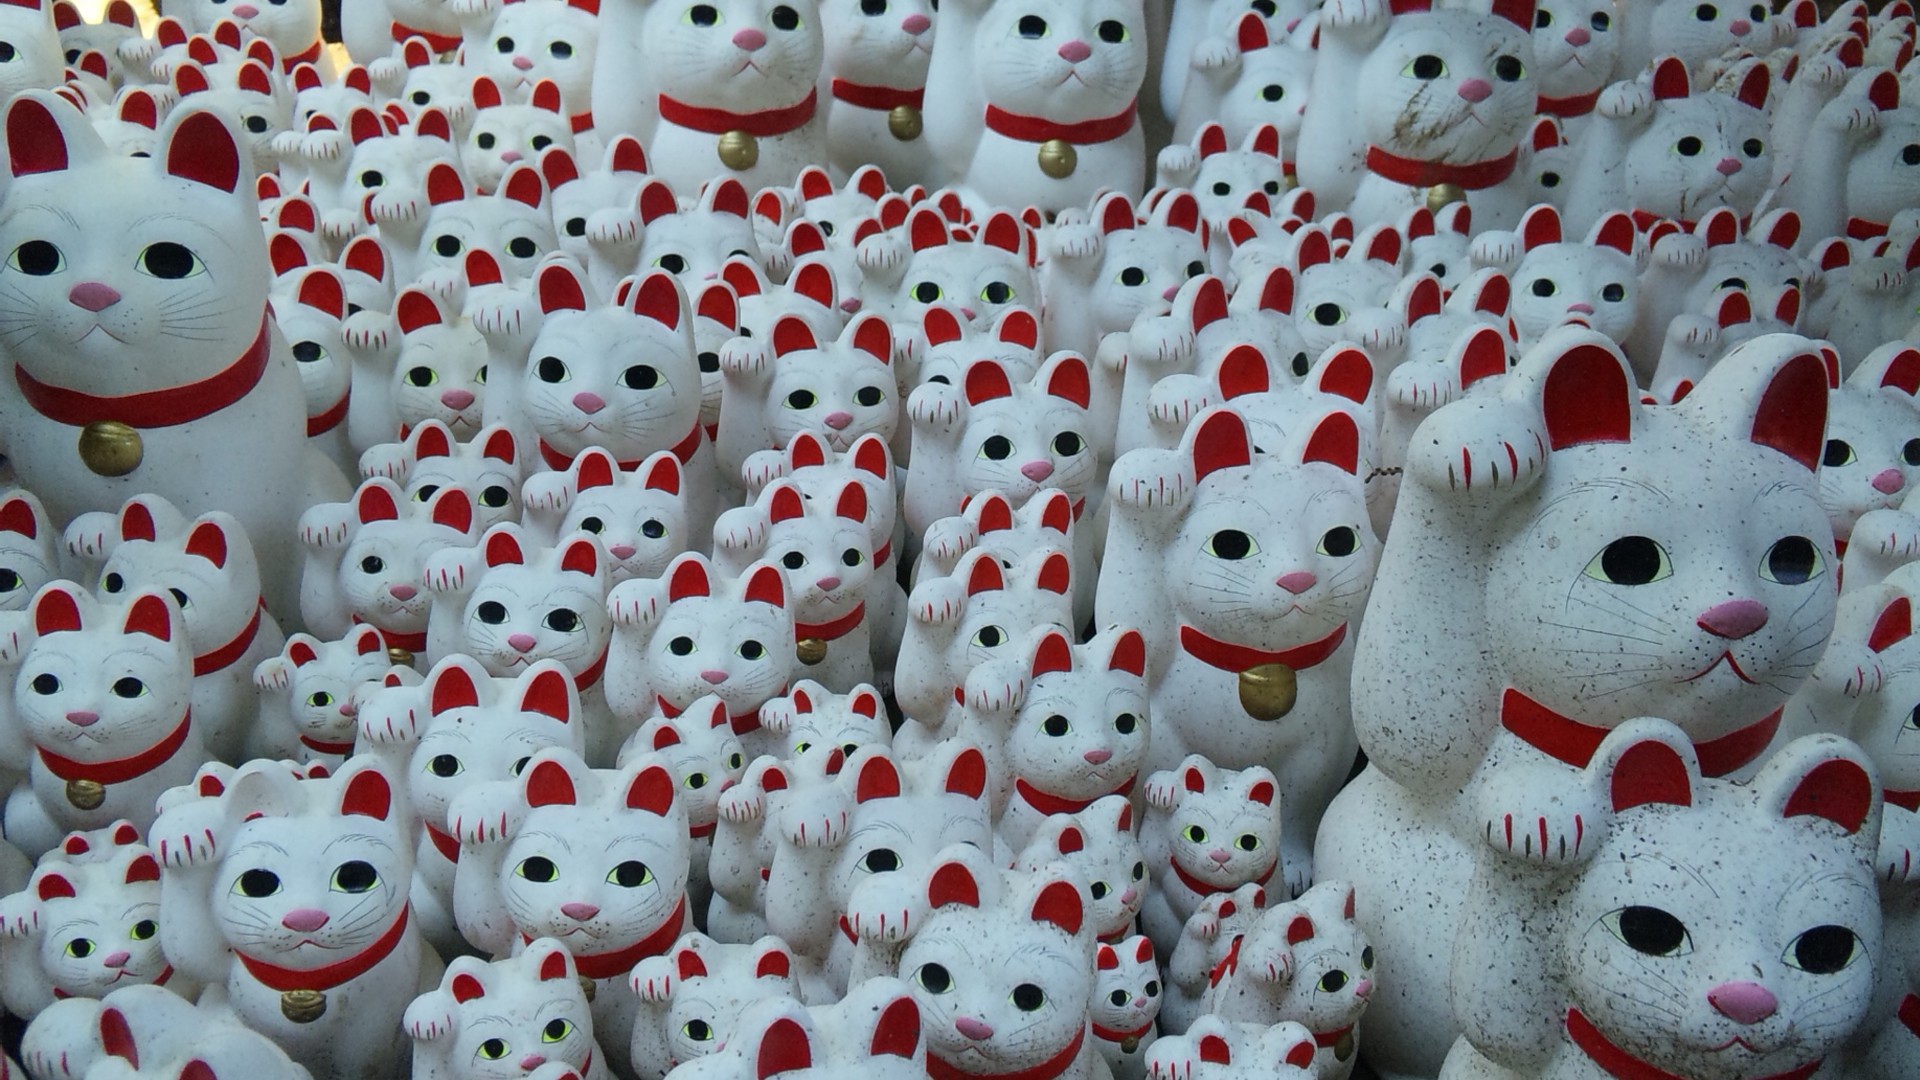 General 1920x1080 animals red white cats figurines